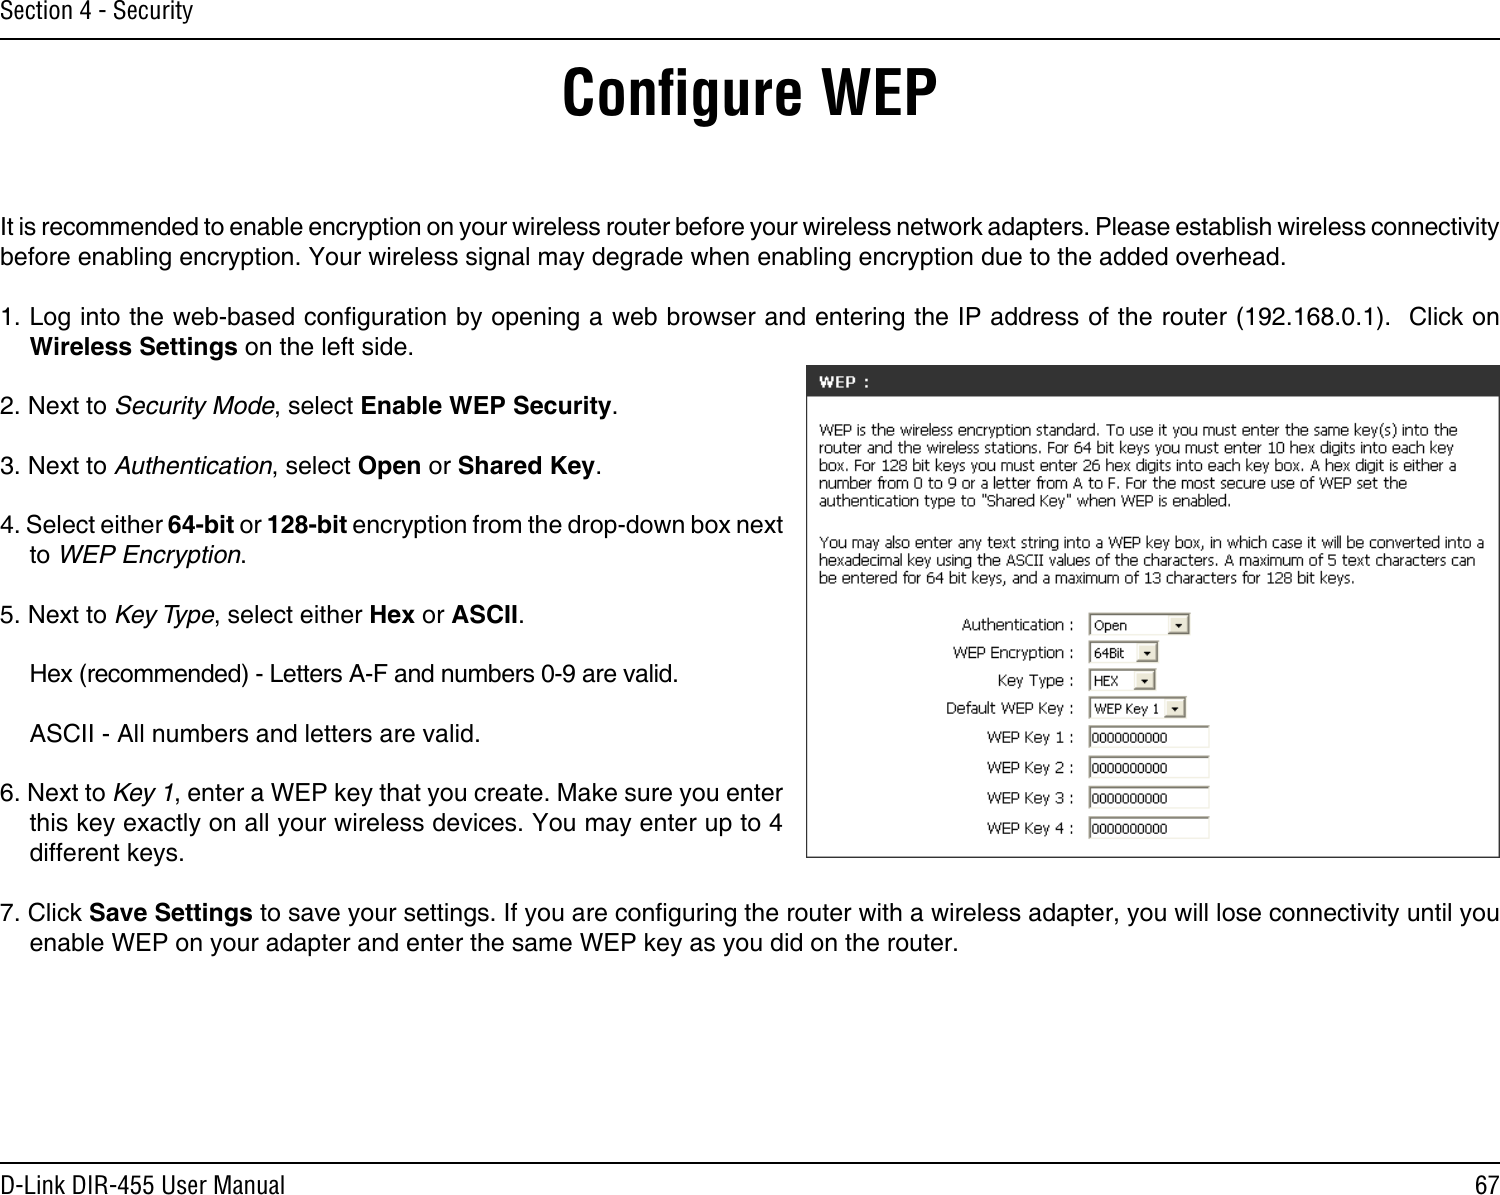 67D-Link DIR-455 User ManualSection 4 - SecurityConﬁgure WEPIt is recommended to enable encryption on your wireless router before your wireless network adapters. Please establish wireless connectivity before enabling encryption. Your wireless signal may degrade when enabling encryption due to the added overhead.1. Log into the web-based conguration by opening a web browser and entering the IP address of the router (192.168.0.1).  Click on Wireless Settings on the left side.2. Next to Security Mode, select Enable WEP Security.3. Next to Authentication, select Open or Shared Key.4. Select either 64-bit or 128-bit encryption from the drop-down box next to WEP Encryption. 5. Next to Key Type, select either Hex or ASCII.  Hex (recommended) - Letters A-F and numbers 0-9 are valid.  ASCII - All numbers and letters are valid.6. Next to Key 1, enter a WEP key that you create. Make sure you enter this key exactly on all your wireless devices. You may enter up to 4 different keys.7. Click Save Settings to save your settings. If you are conguring the router with a wireless adapter, you will lose connectivity until you enable WEP on your adapter and enter the same WEP key as you did on the router.